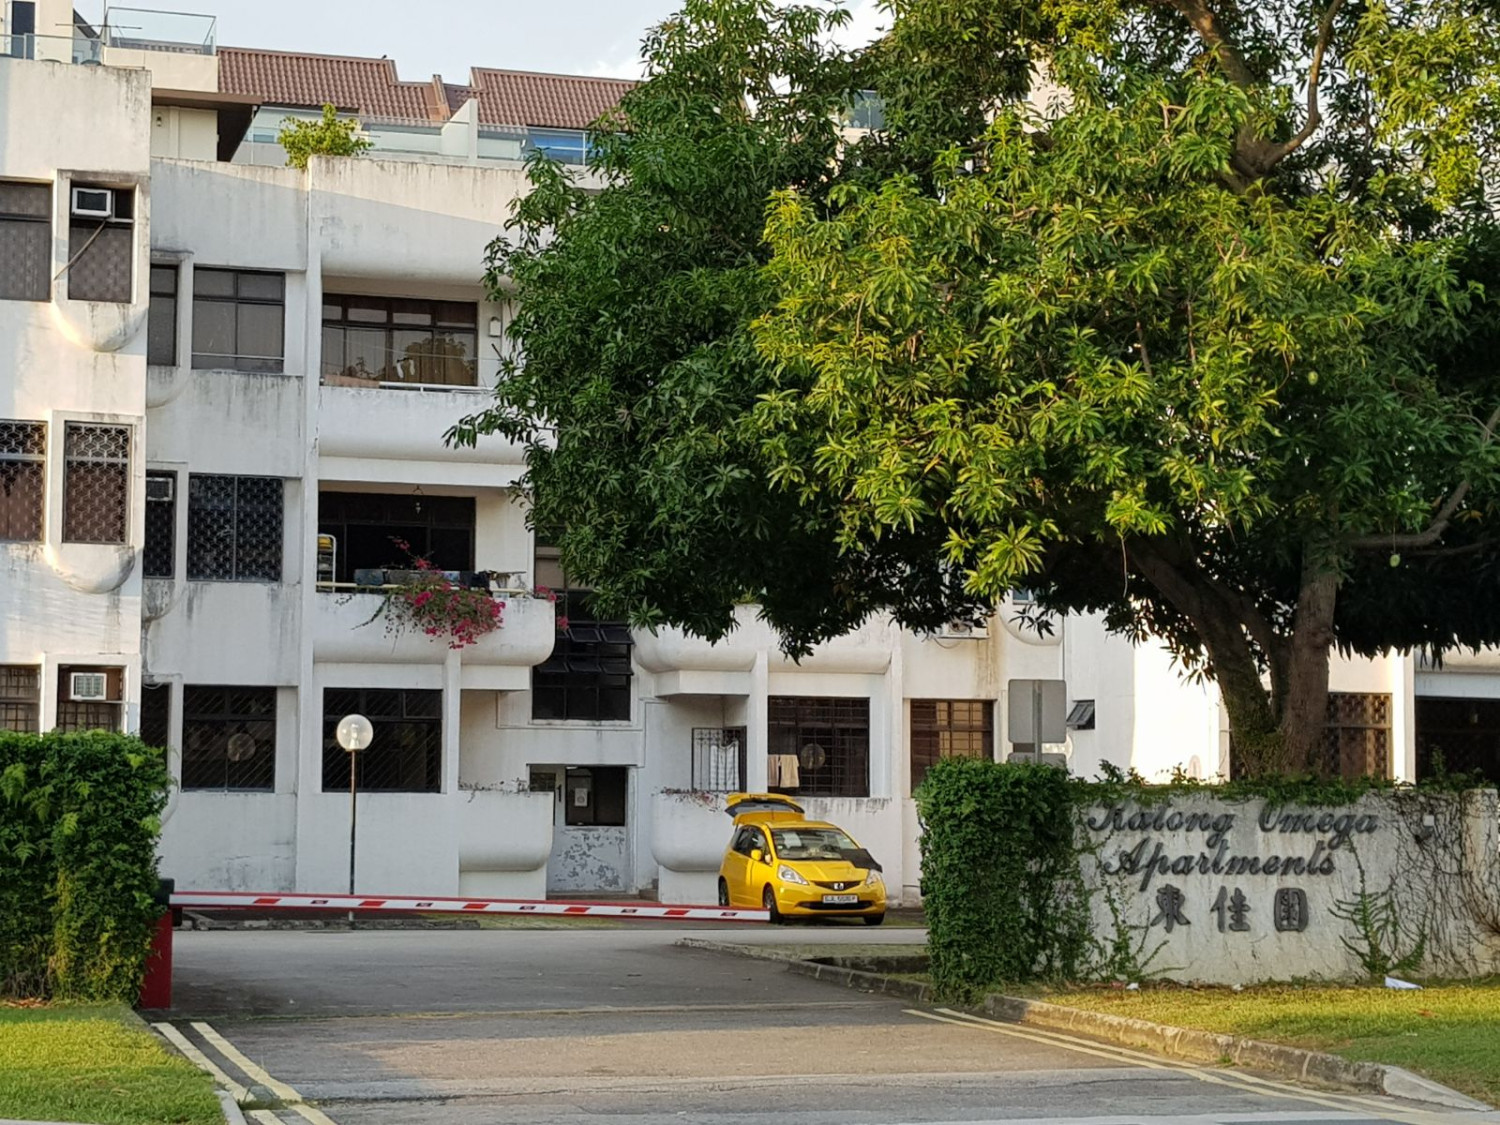 Katong Omega Apartments launched for sale with 100% owners’ consent - Property News